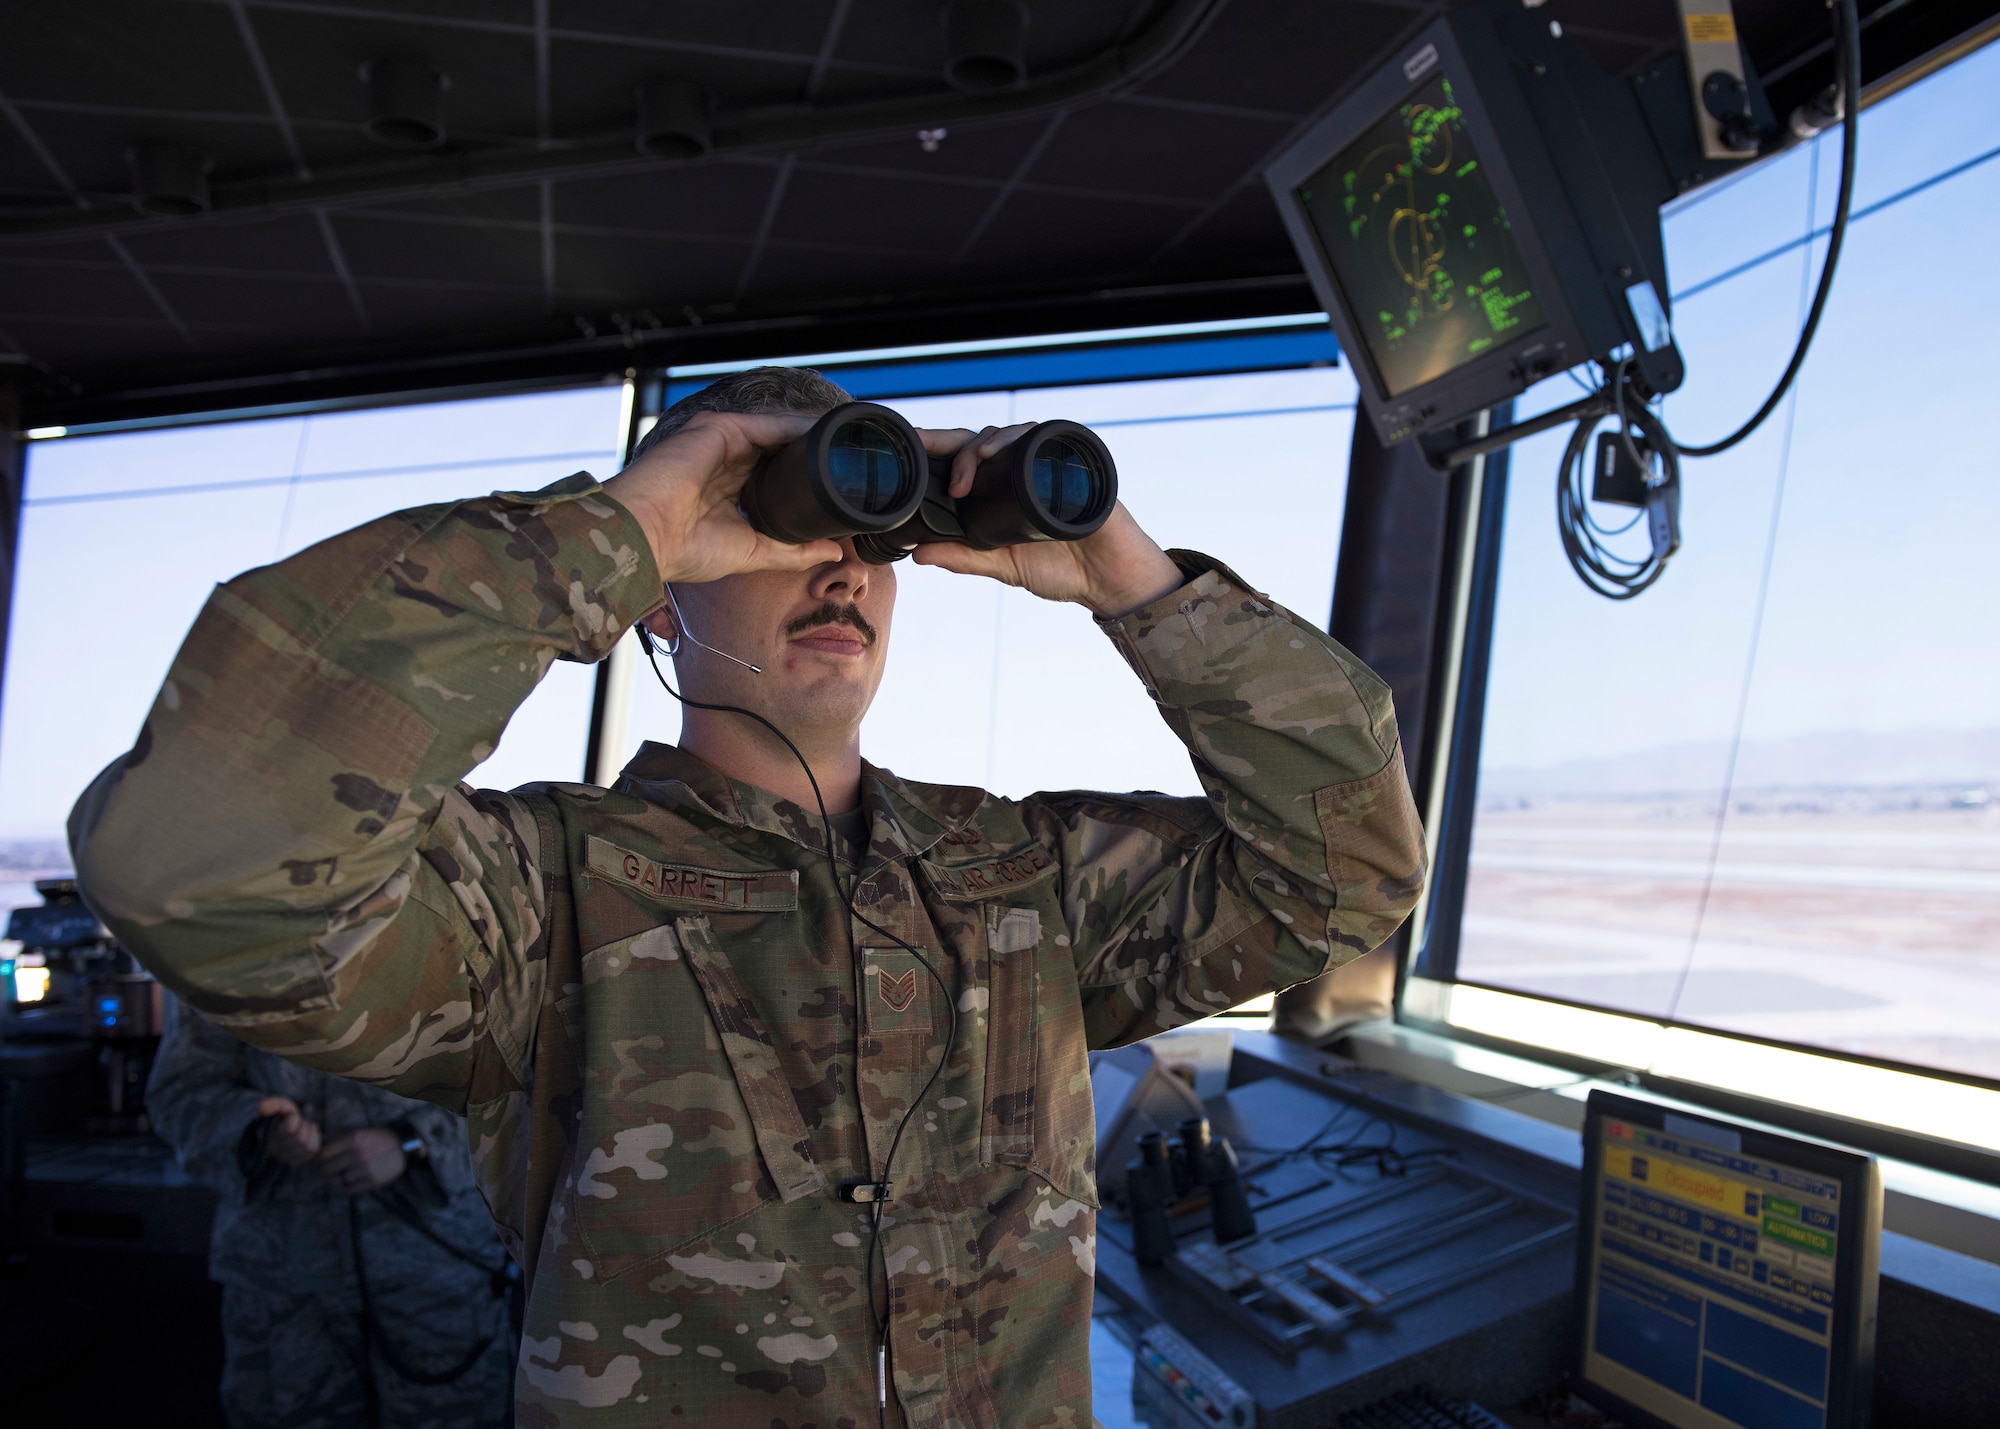 Staff Sgt. George Garrett, 56th Operation Support Squadron air traffic controller, scans the horizon for a pair of F-35 Lightning II aircraft returning from a mission from the Air Traffic Control Tower July 15, 2019, at Luke Air Force Base, Ariz.